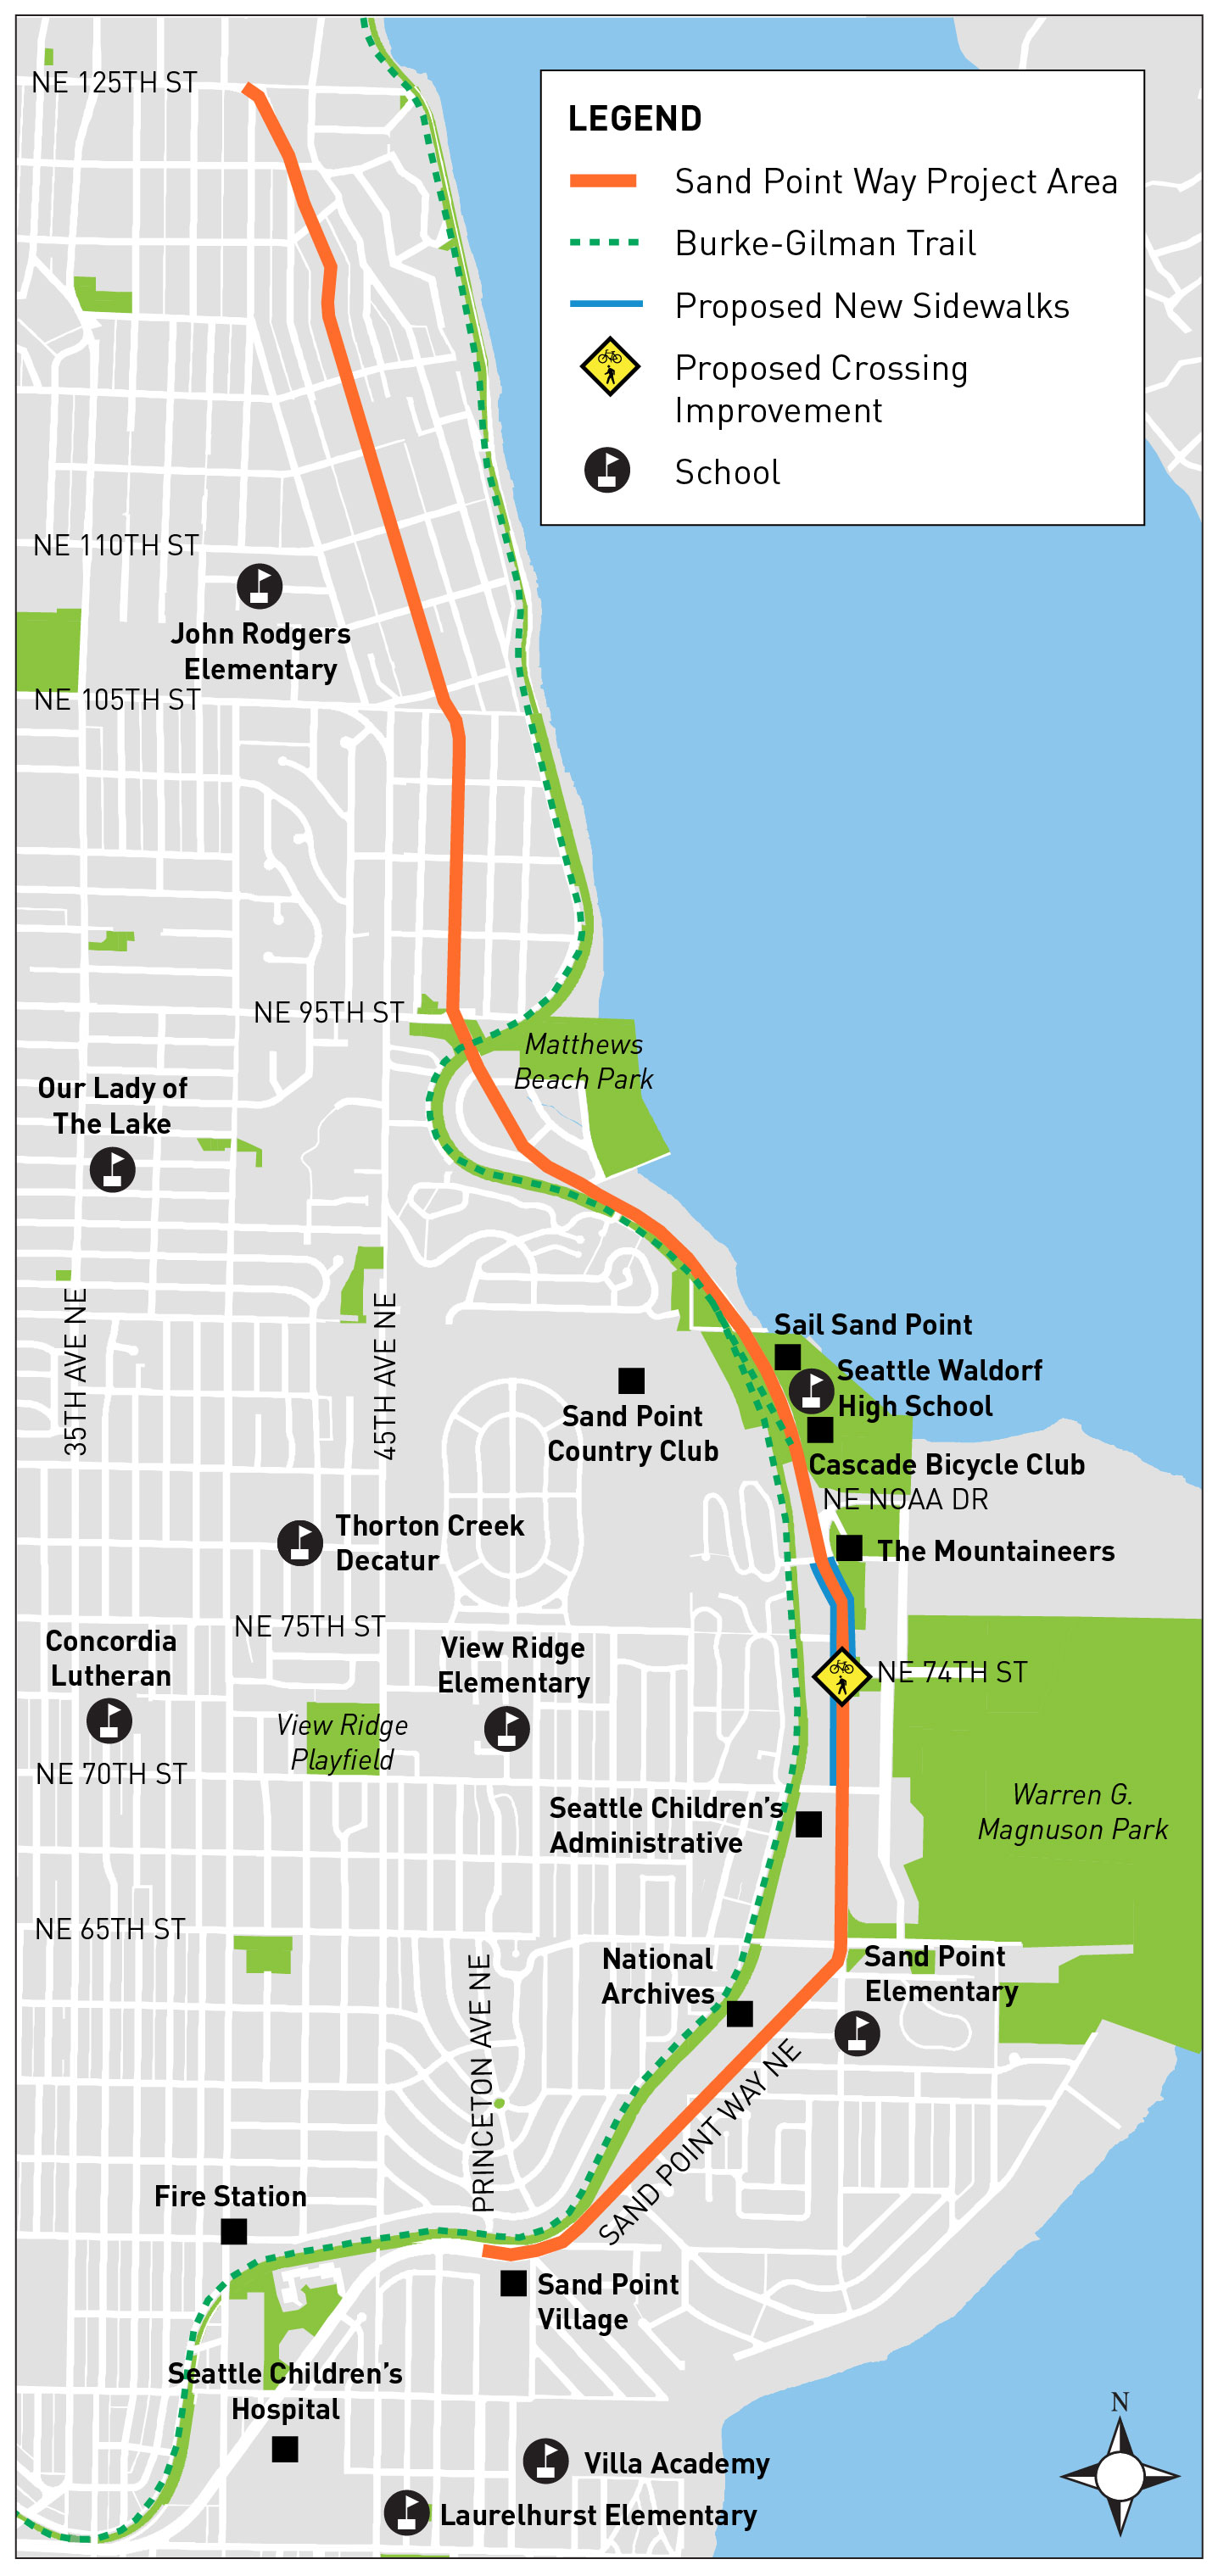 Sand Point Way Corridor Project Area Map